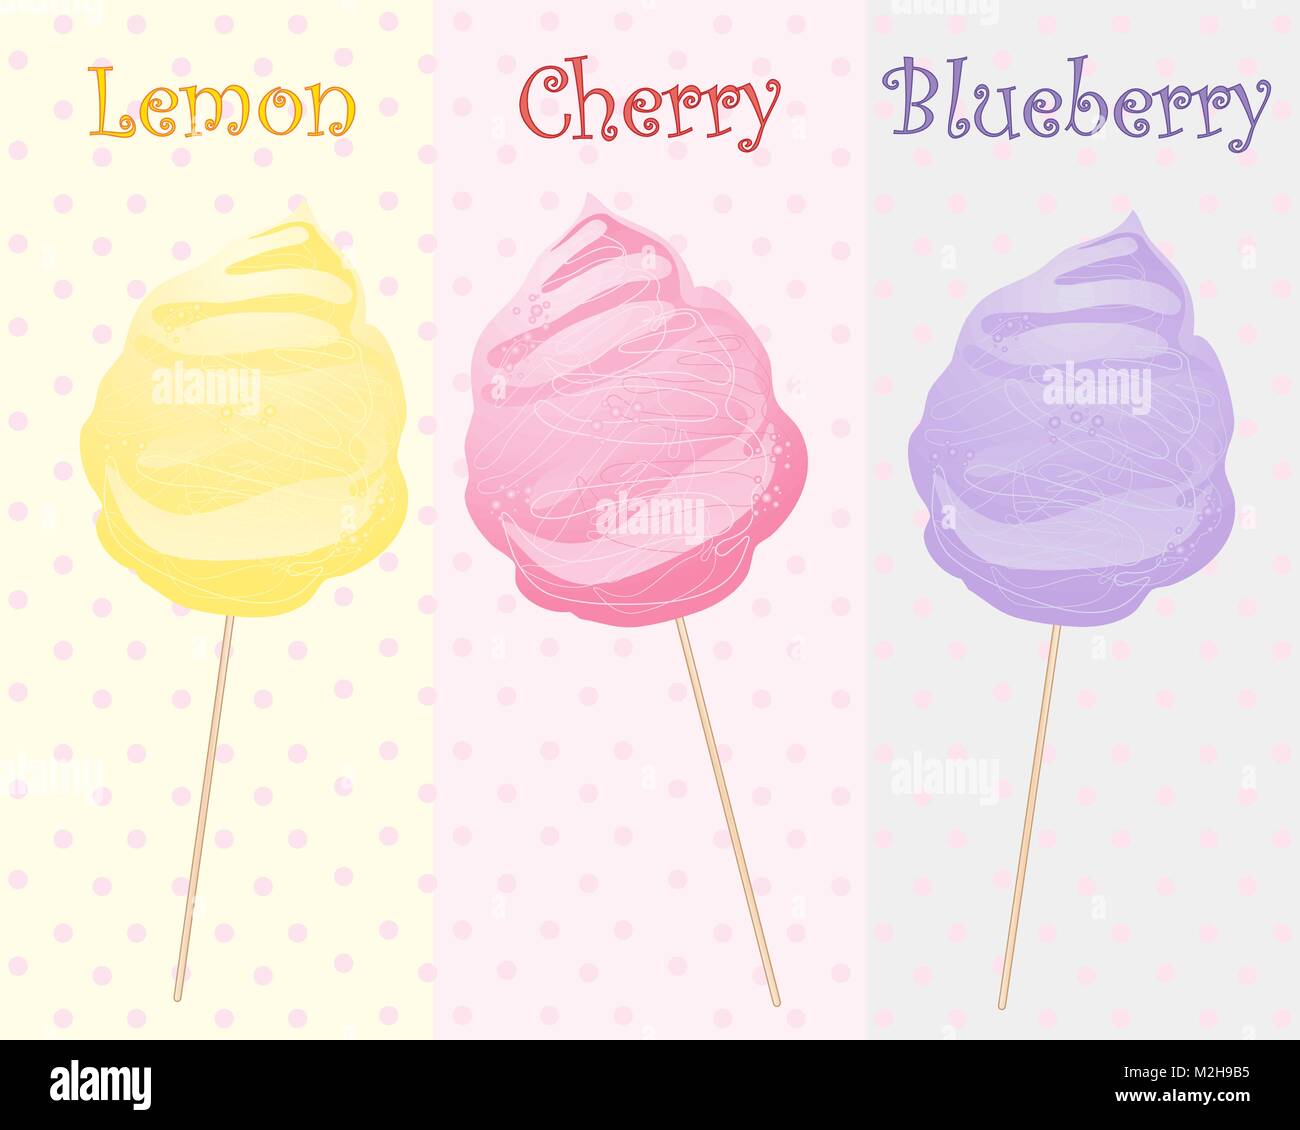 a vector illustration in eps 10 format of cotton candy on sticks in fruity lemon cherry and blueberry flavors on a colorful background Stock Vector